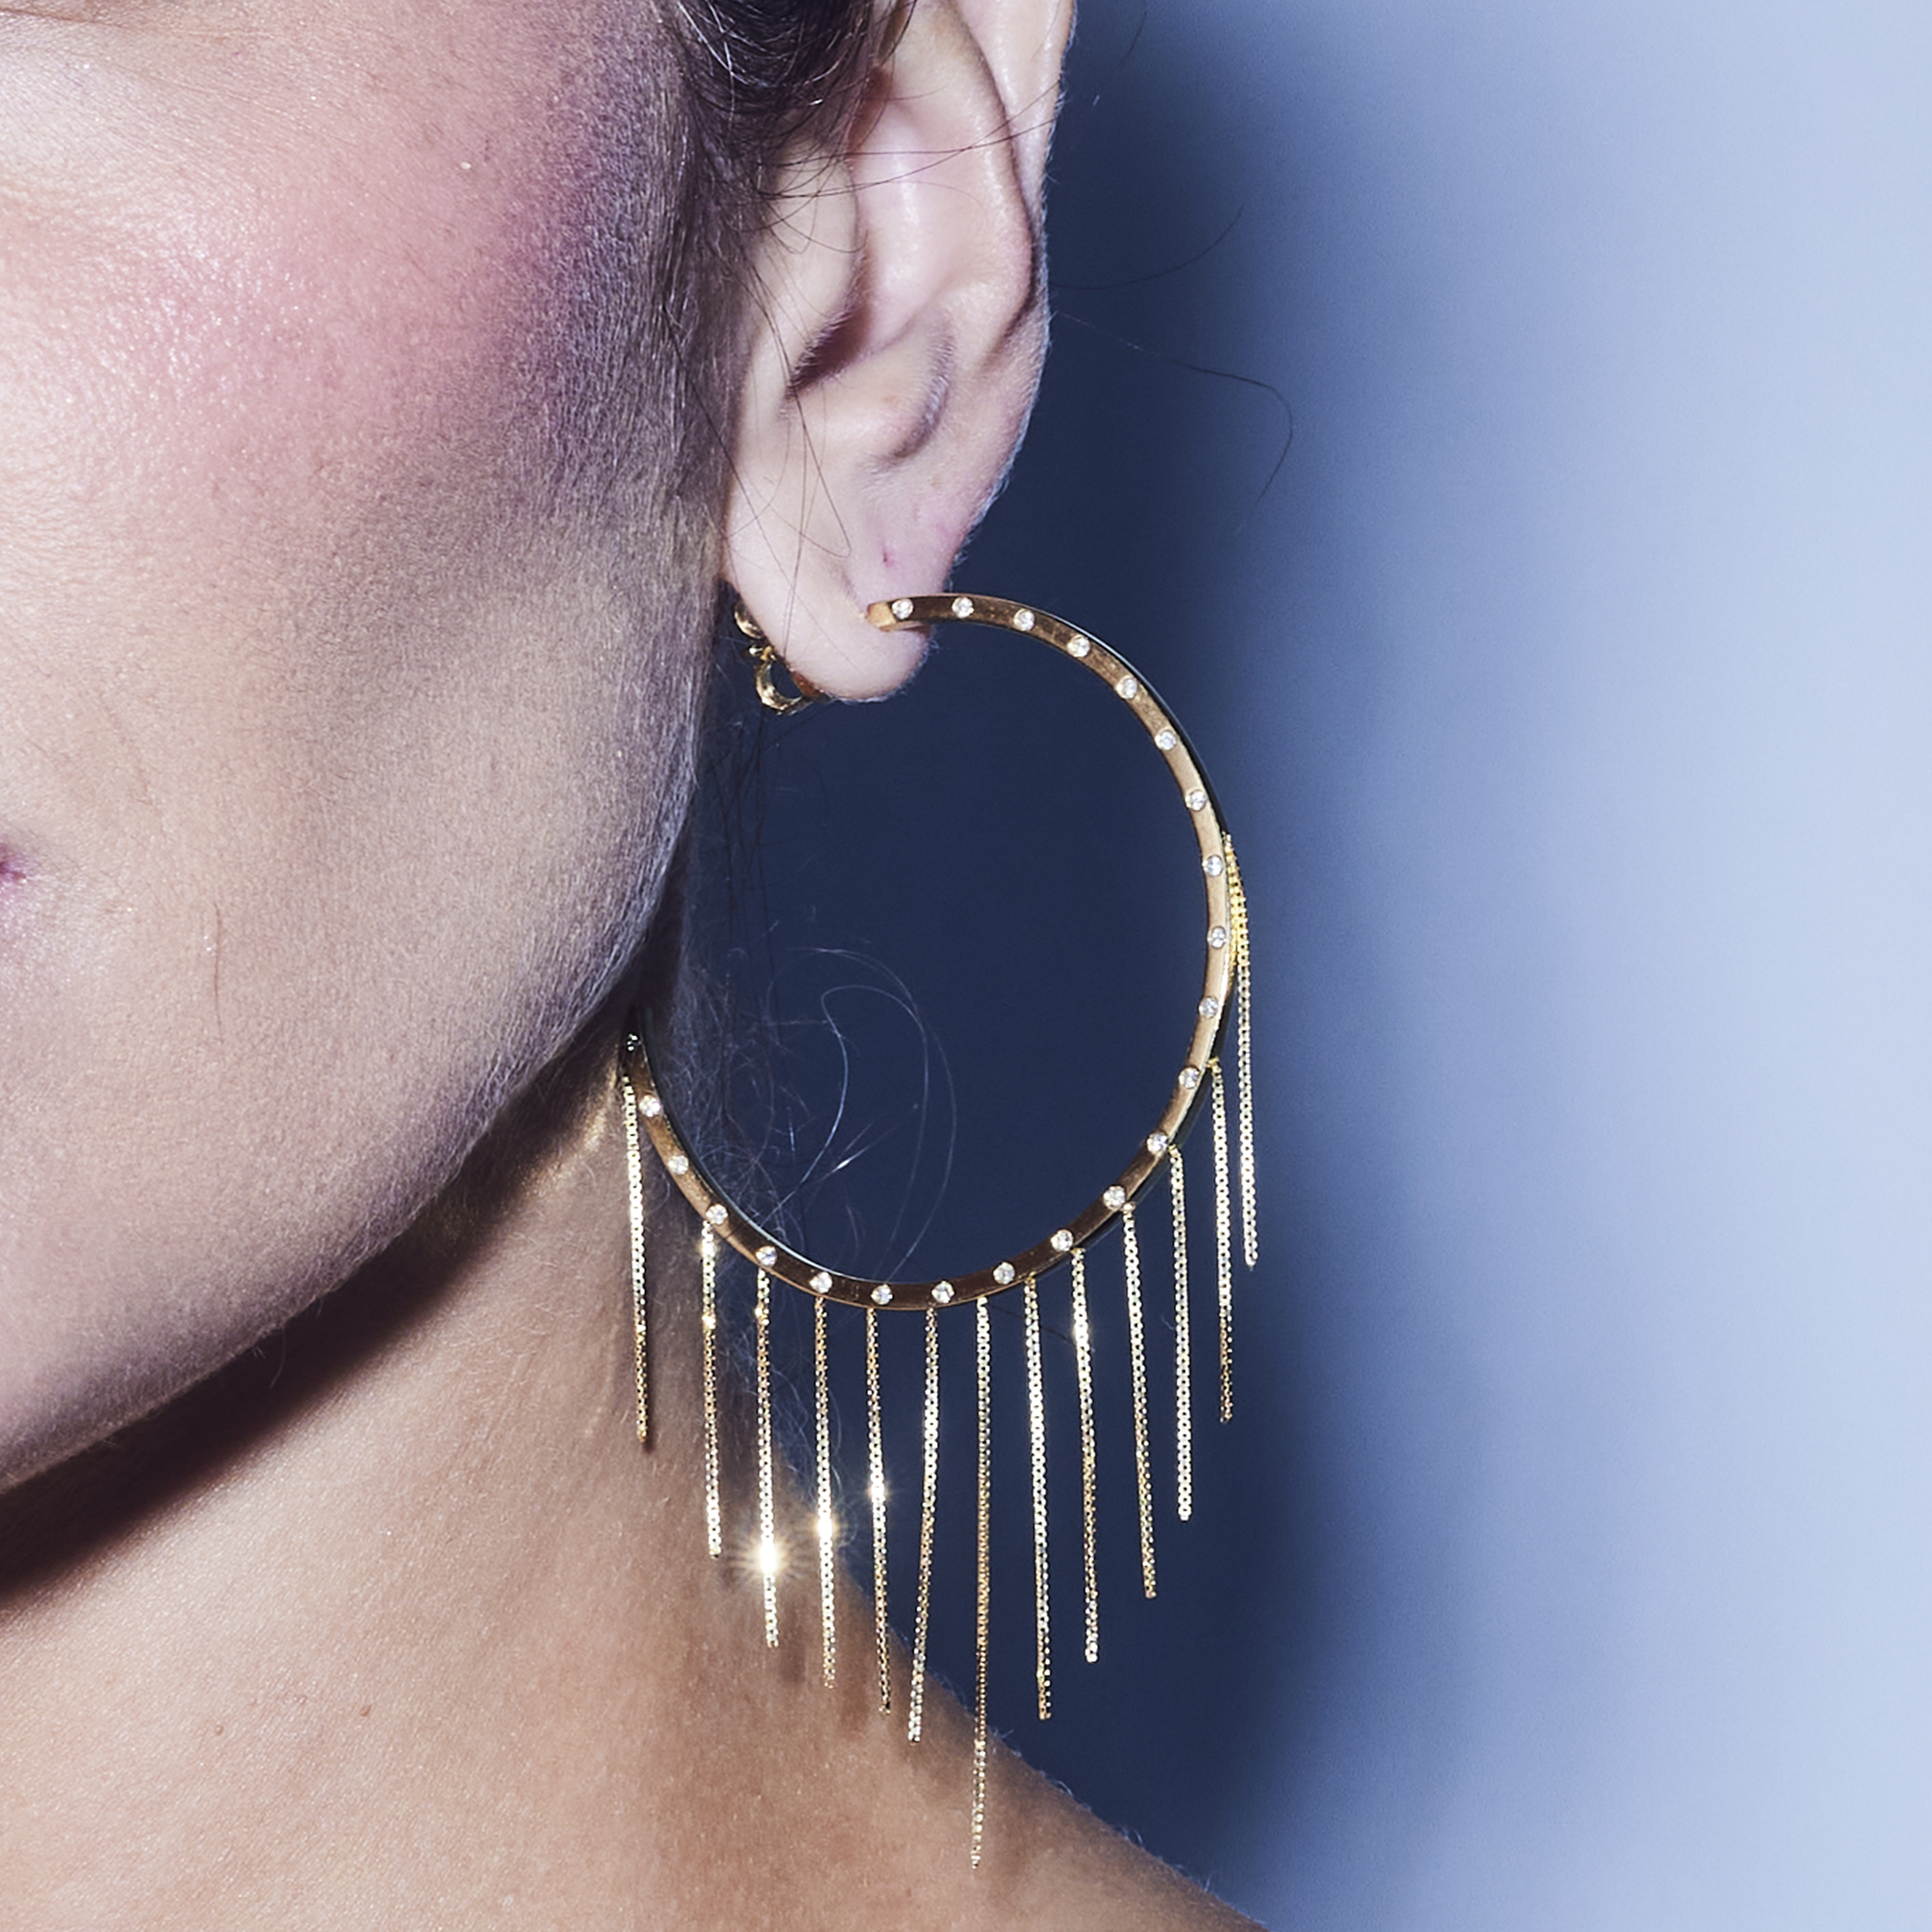 NEW VINTAGE FRINGE HOOP EARRING IN 18K YELLOW GOLD WITH DIAMOND